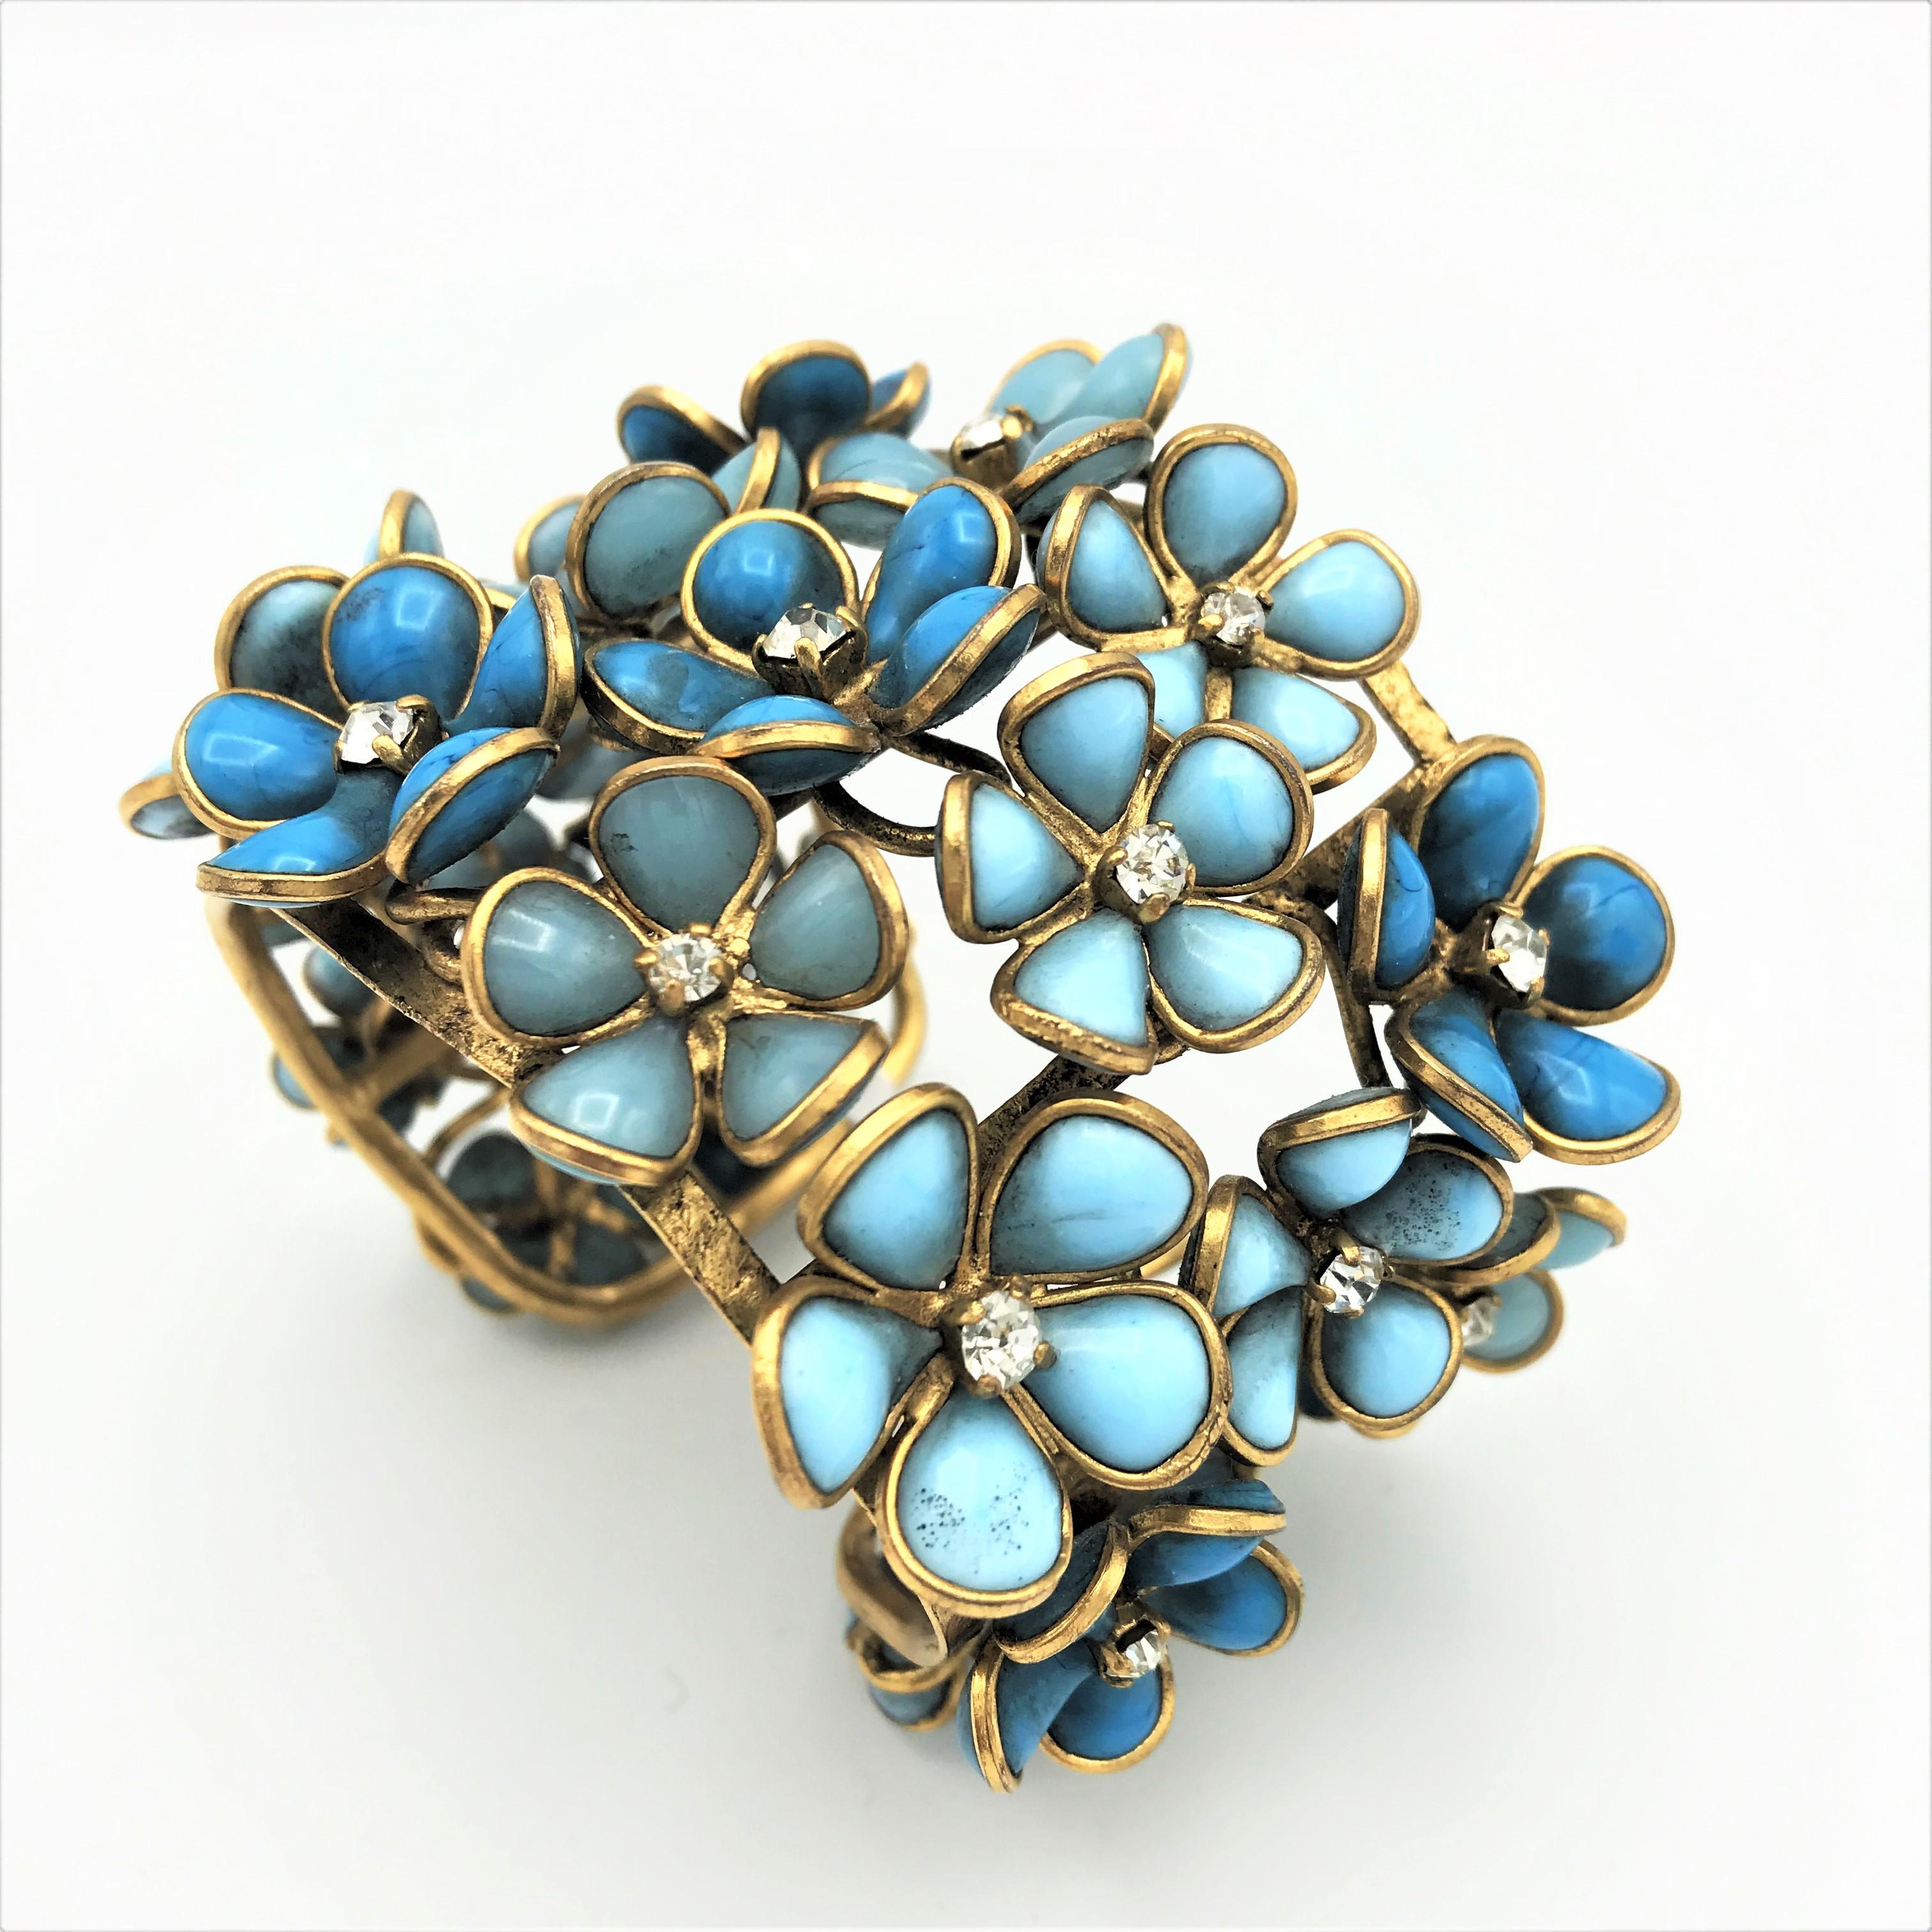 Women's Flower open bracelet with many Gripoix flowers and rhinestones, gold plated 